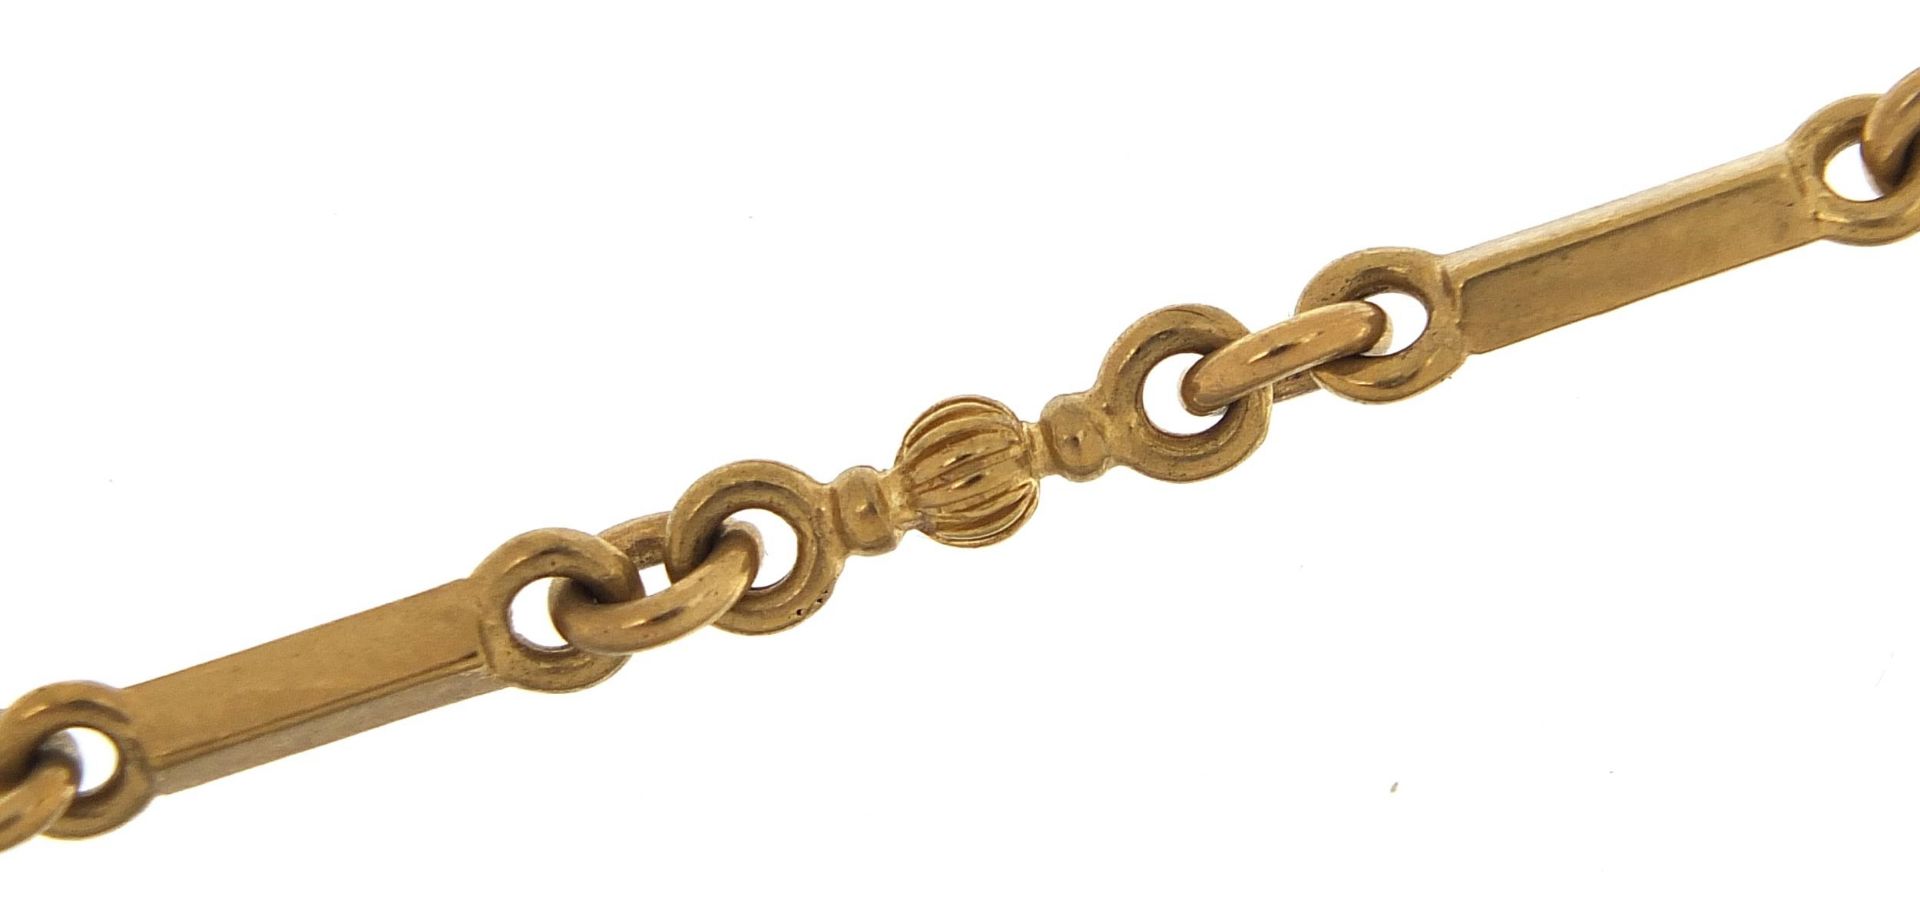 9ct gold fancy link bracelet, 18.5cm in length, 10.4g - this lot is sold without buyer's premium